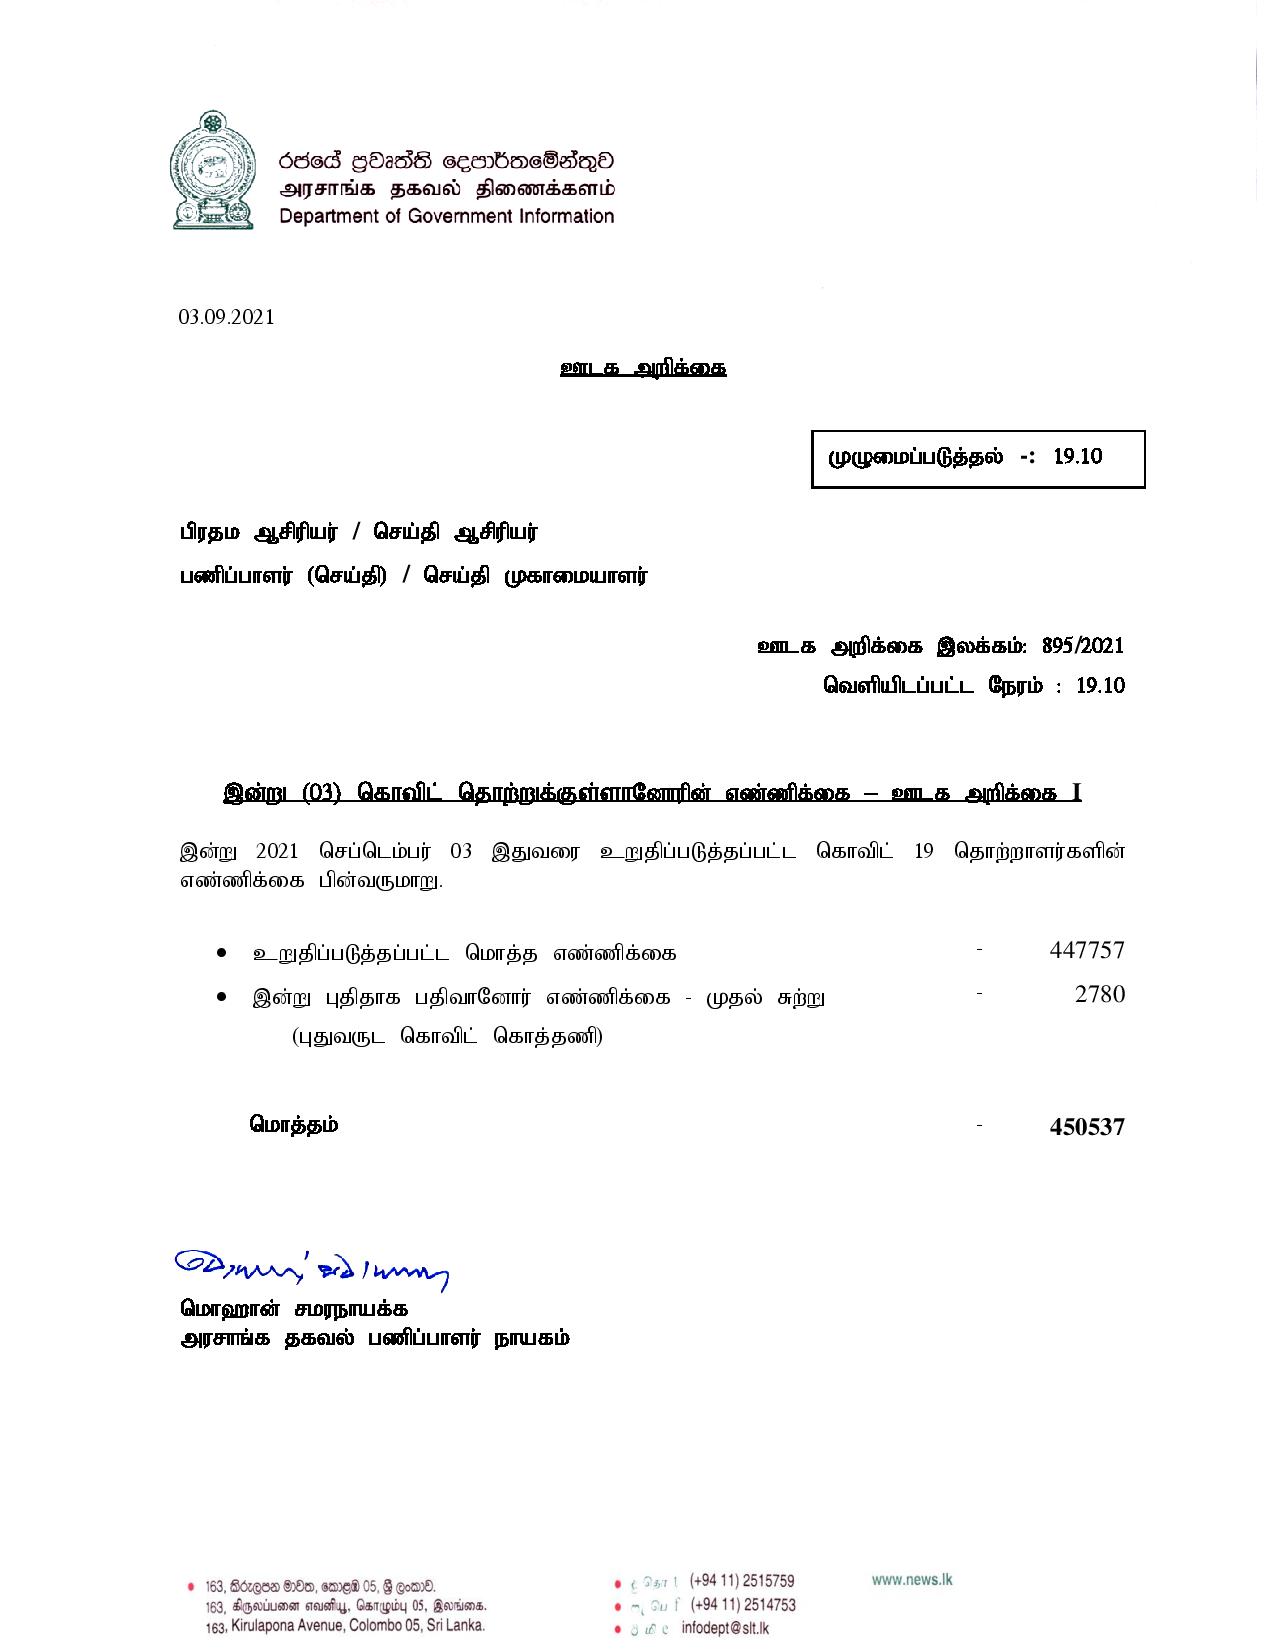 Release No 895 Tamil page 001 1